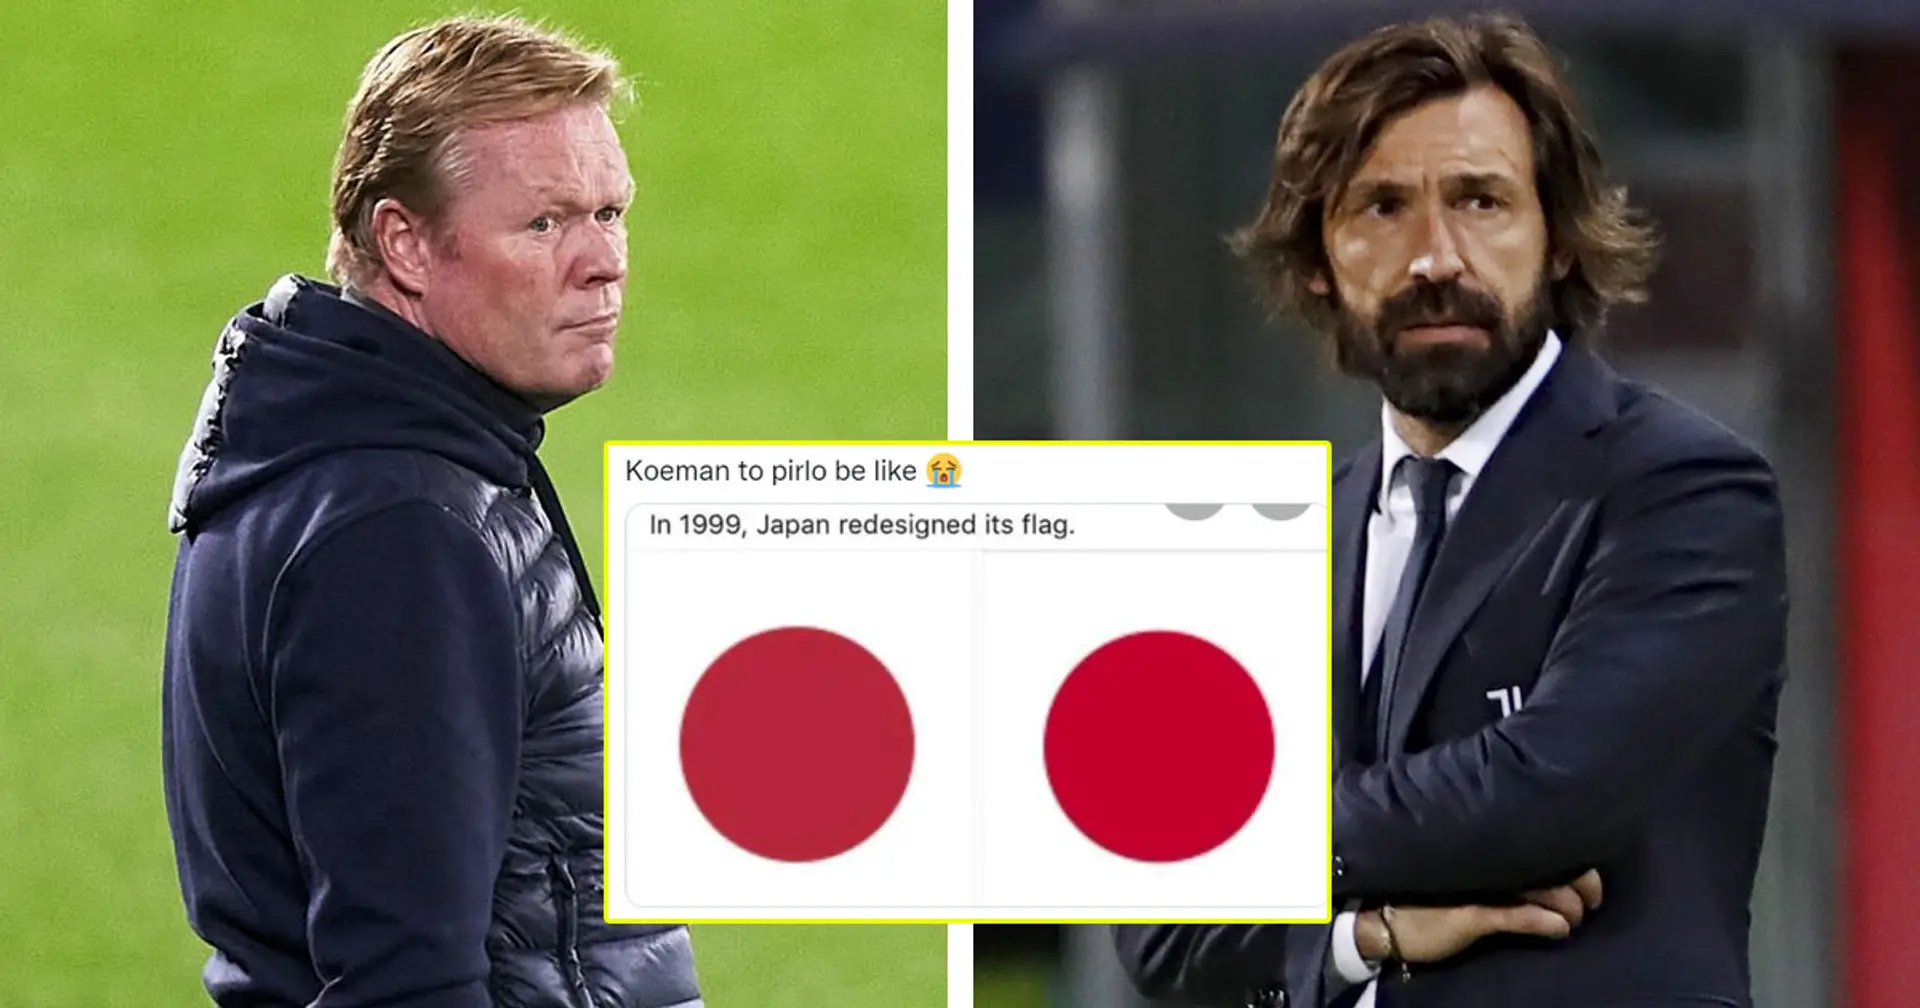 'Pirlo for Koeman is like that Japan flag redesign': Fans react to Italian being linked as Koeman's successor